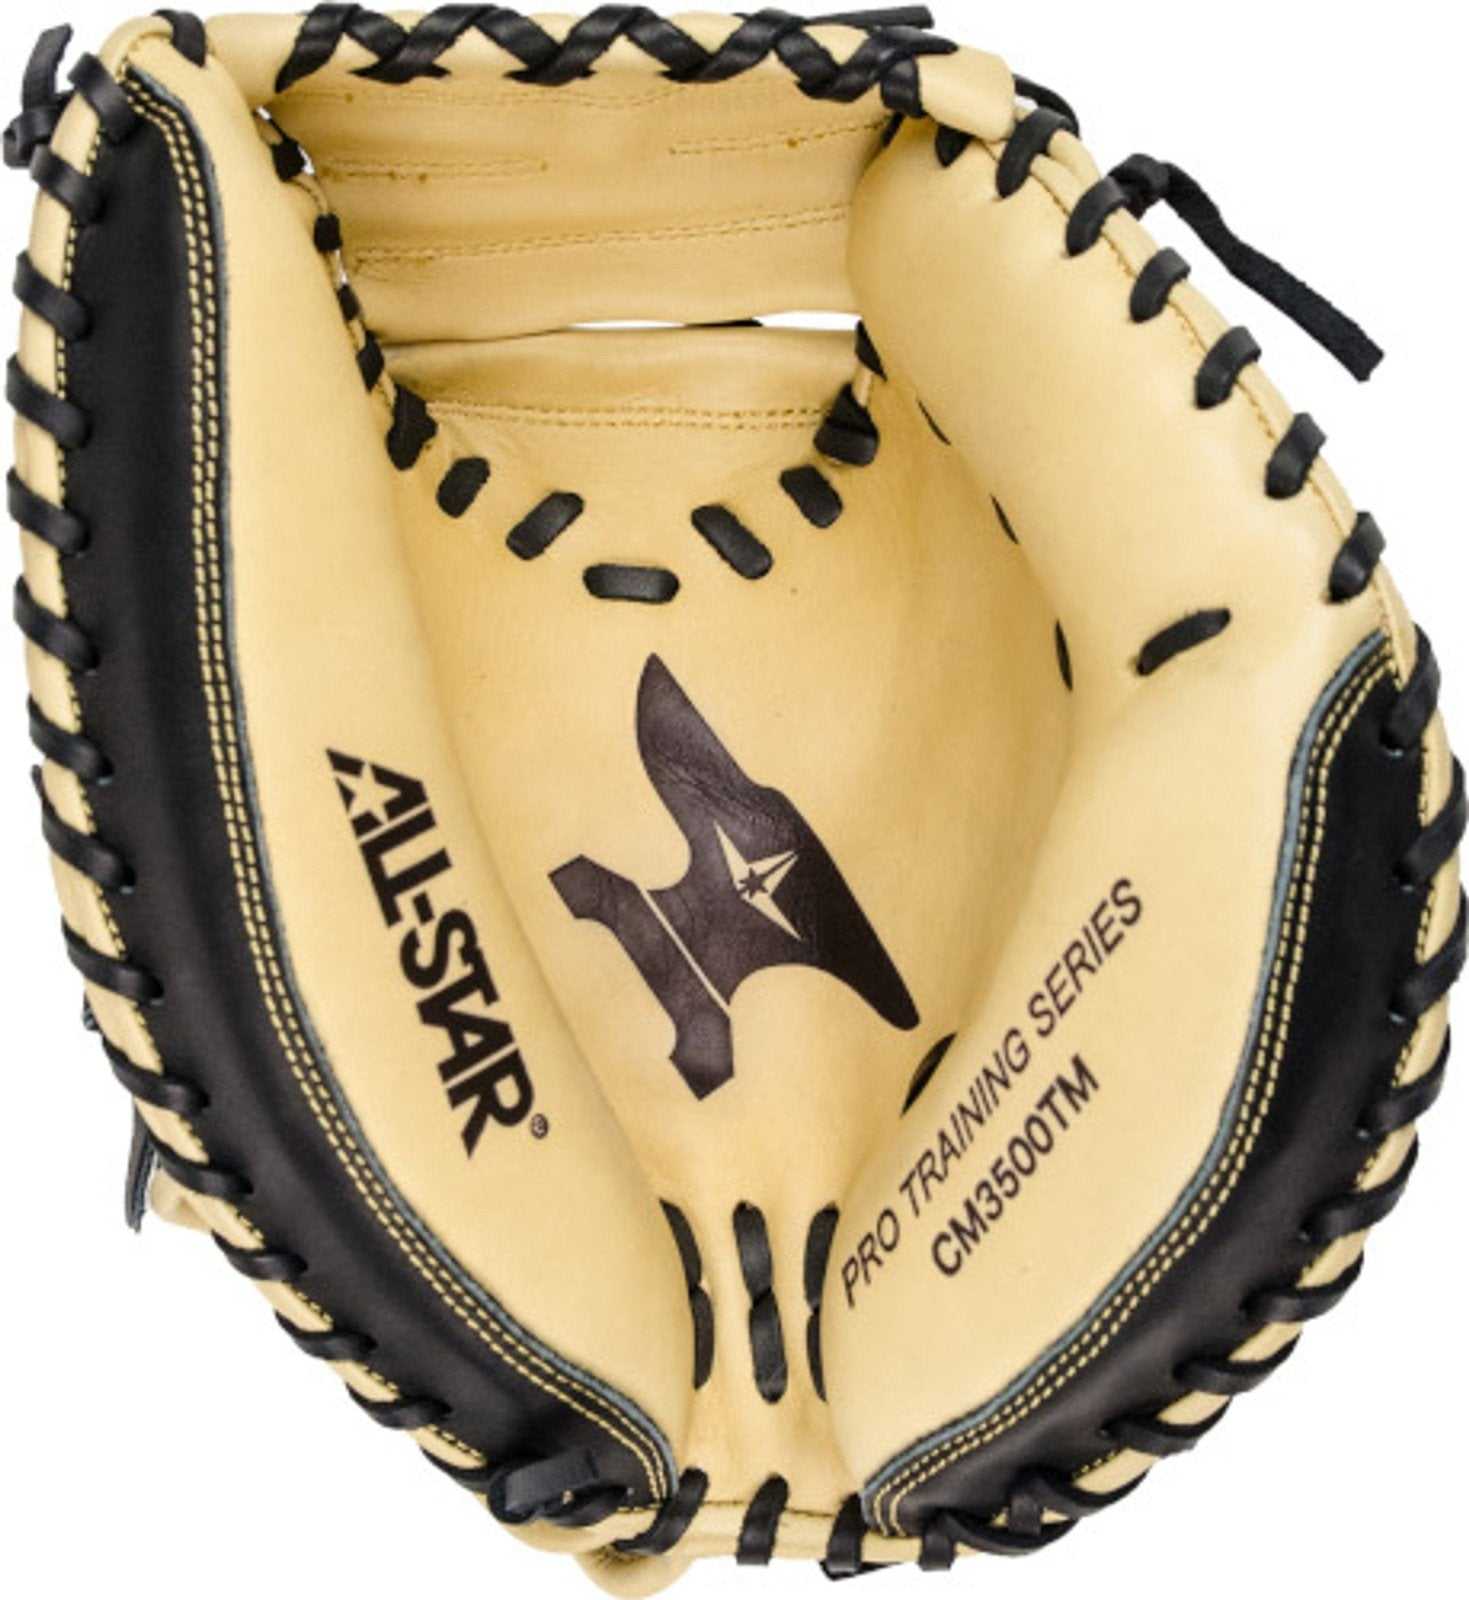 All Star Anvil CM5000TM 33.50" Weighted Training Catcher's Mitt - Mocha Tan - HIT a Double - 1